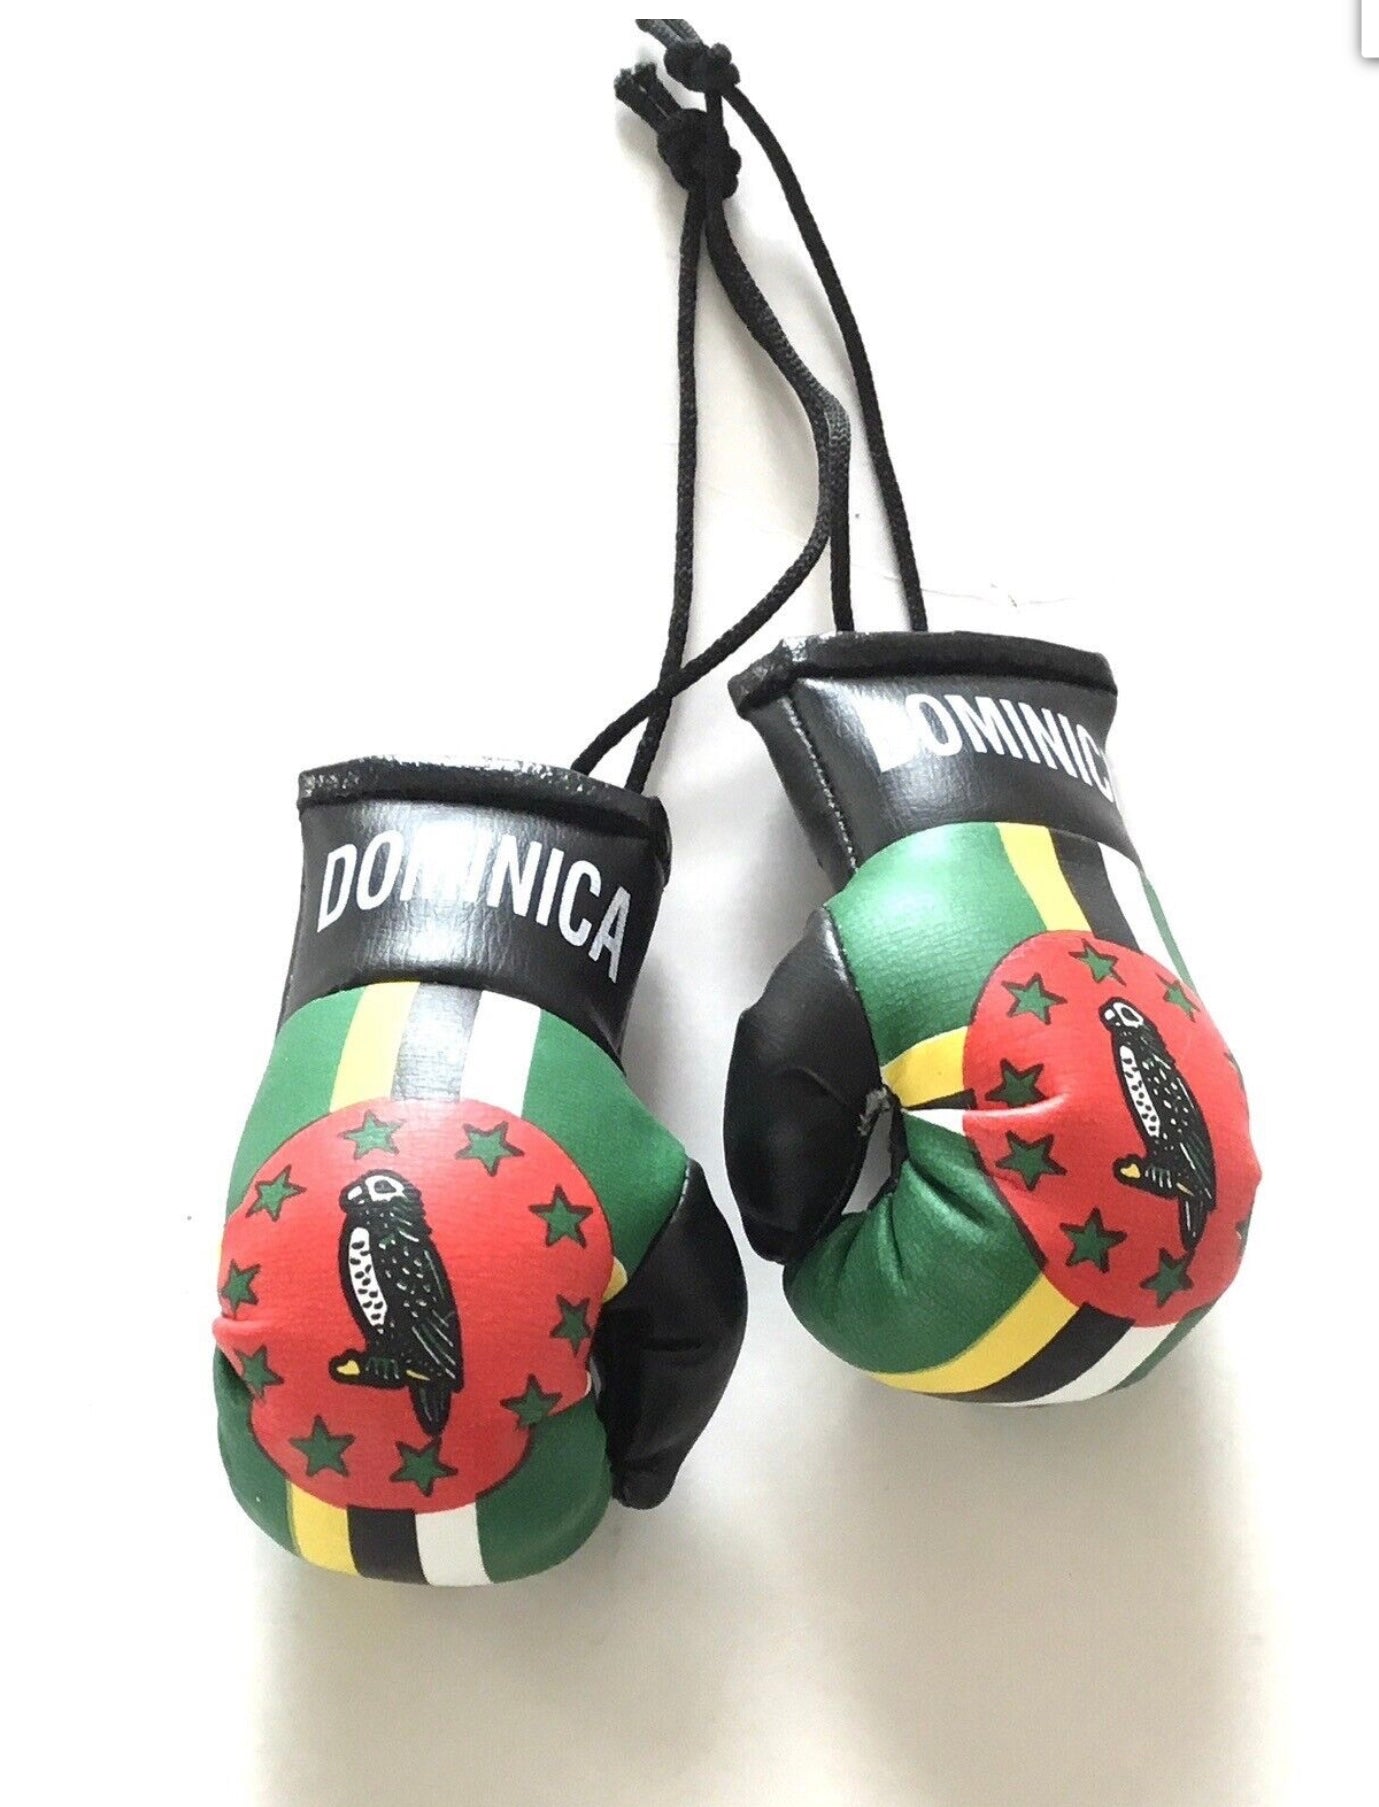 DOMINICA A PAIR OF BOXING GLOVES FOR HANGING IN THE CAR OR OFFICE 9 X 5cm